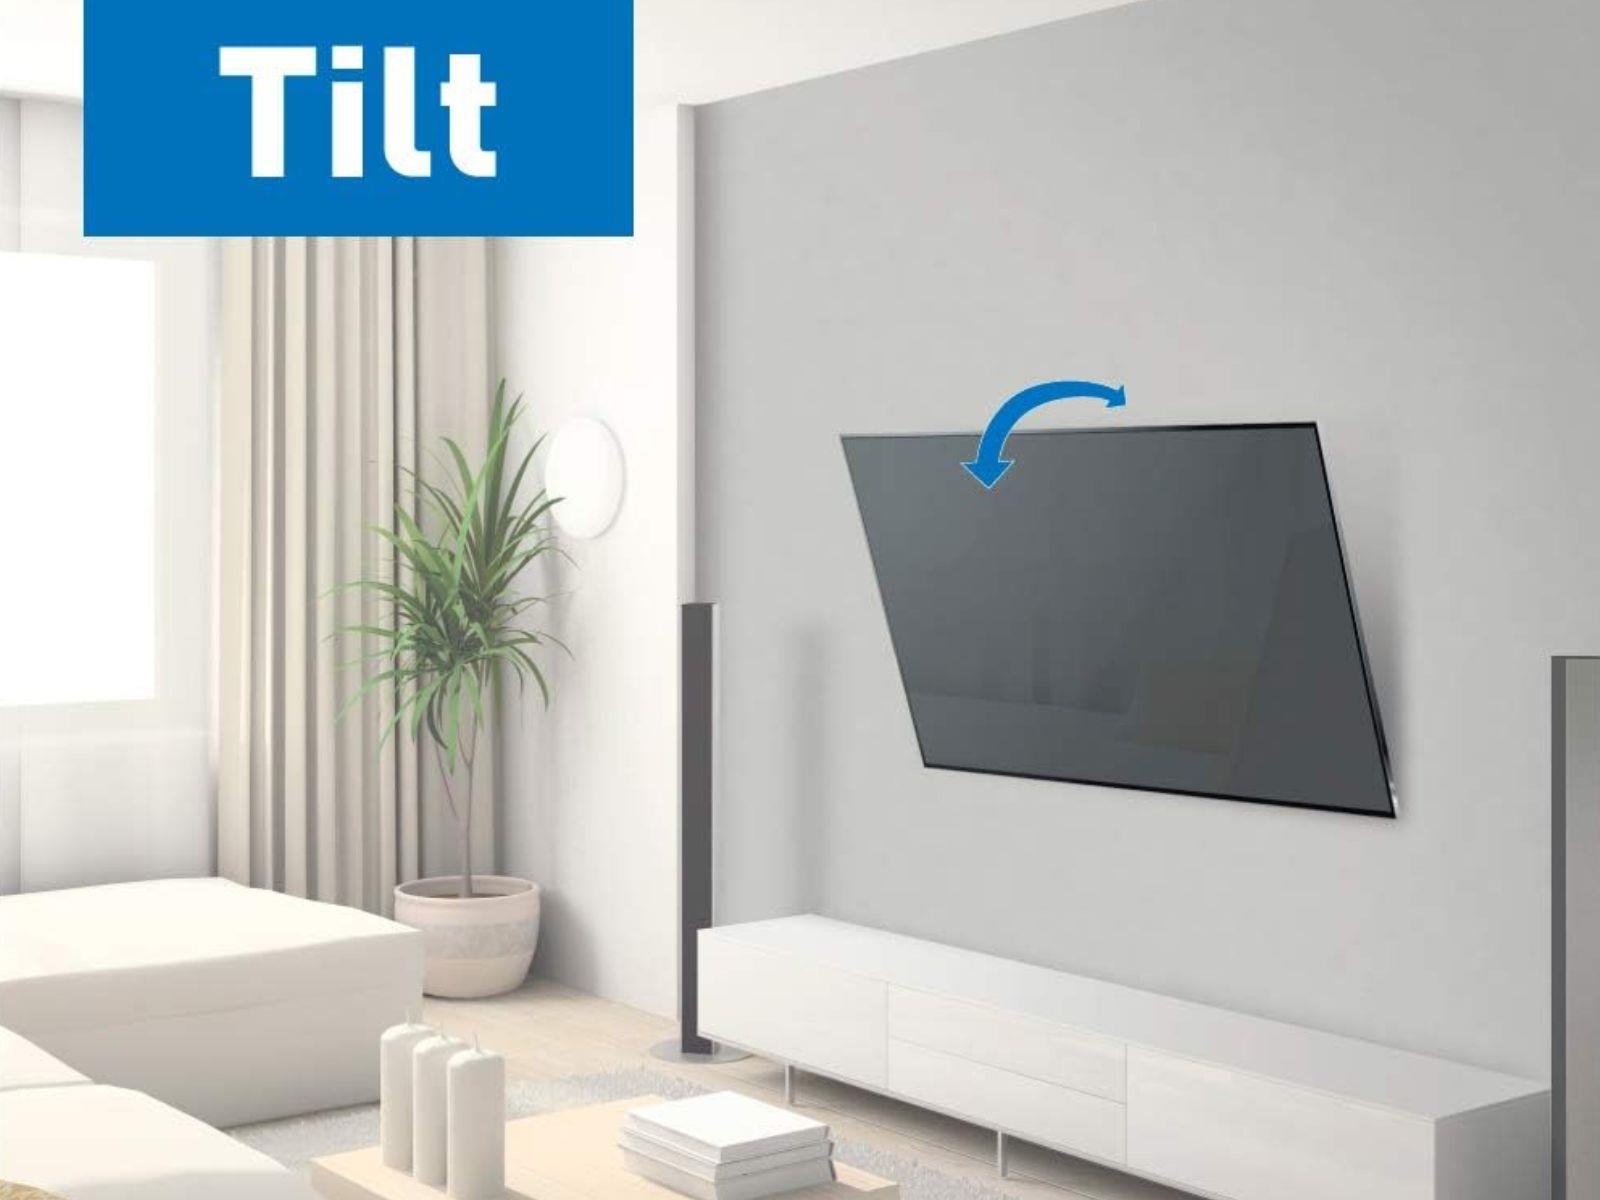 A TV Mounted using the TV Tilt Mounting Bracket For 19-65" Flat-Screen TV's